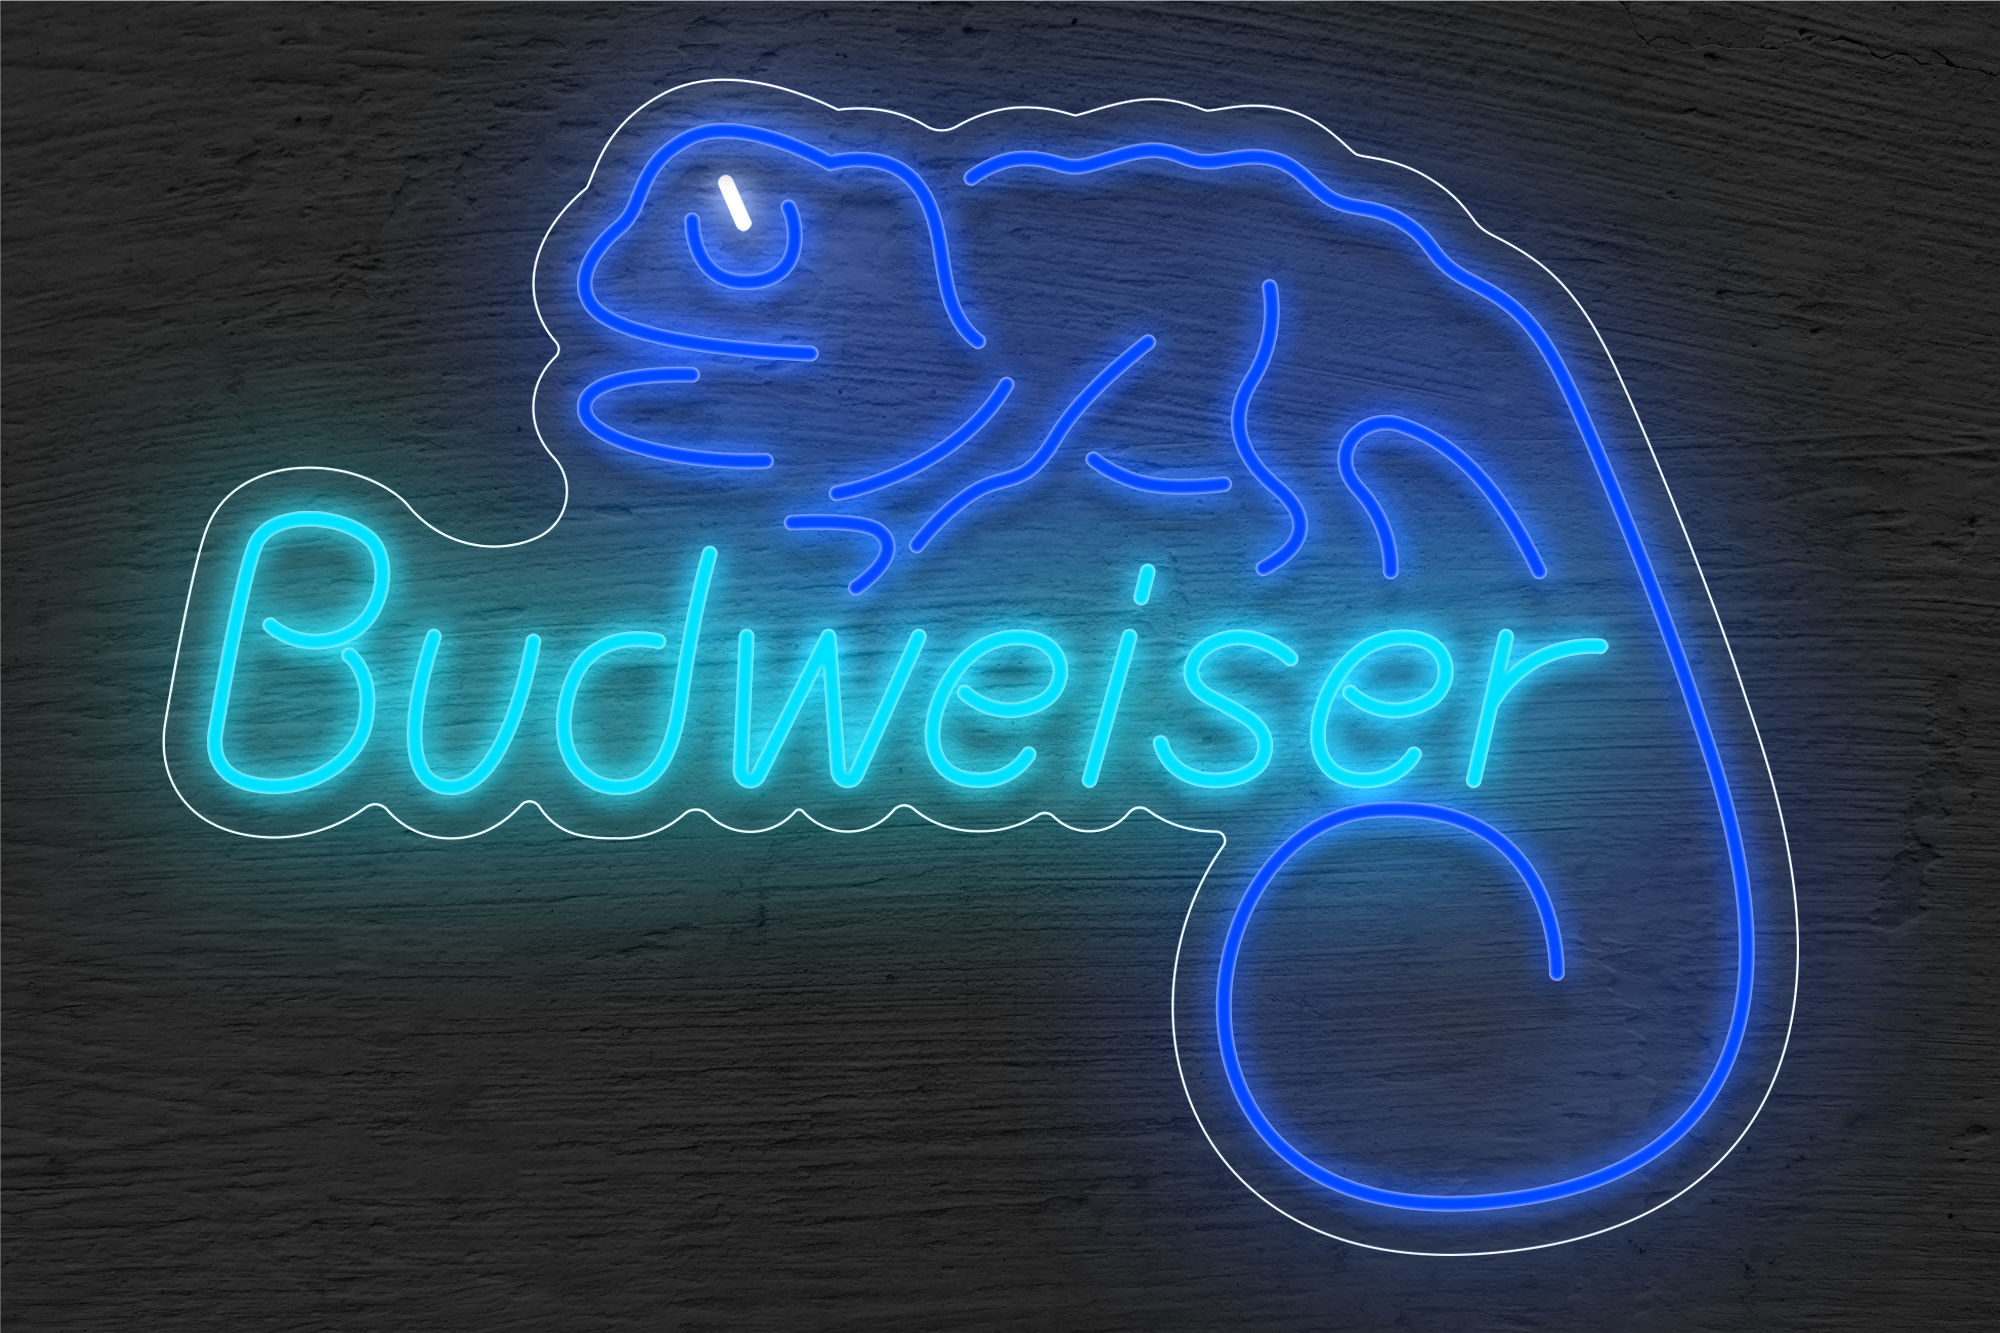 "Budweiser" with Lizard LED Neon Sign